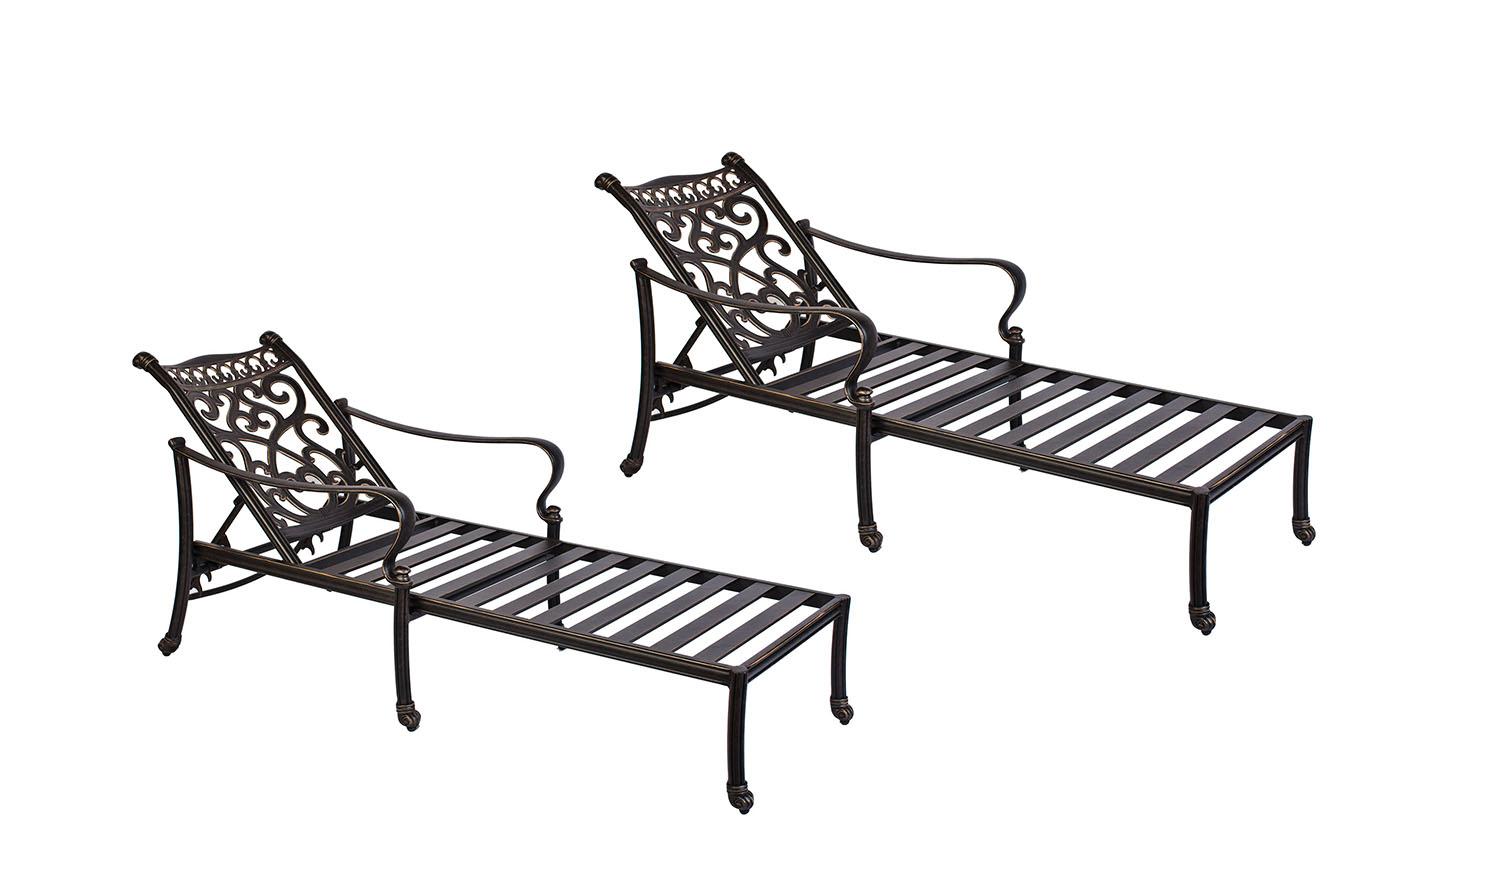 

    
Alexis Cast Aluminum Chaise Lounger w/ Natural Sunbrella Cushion Set of 2 by CaliPatio SPECIAL ORDER
